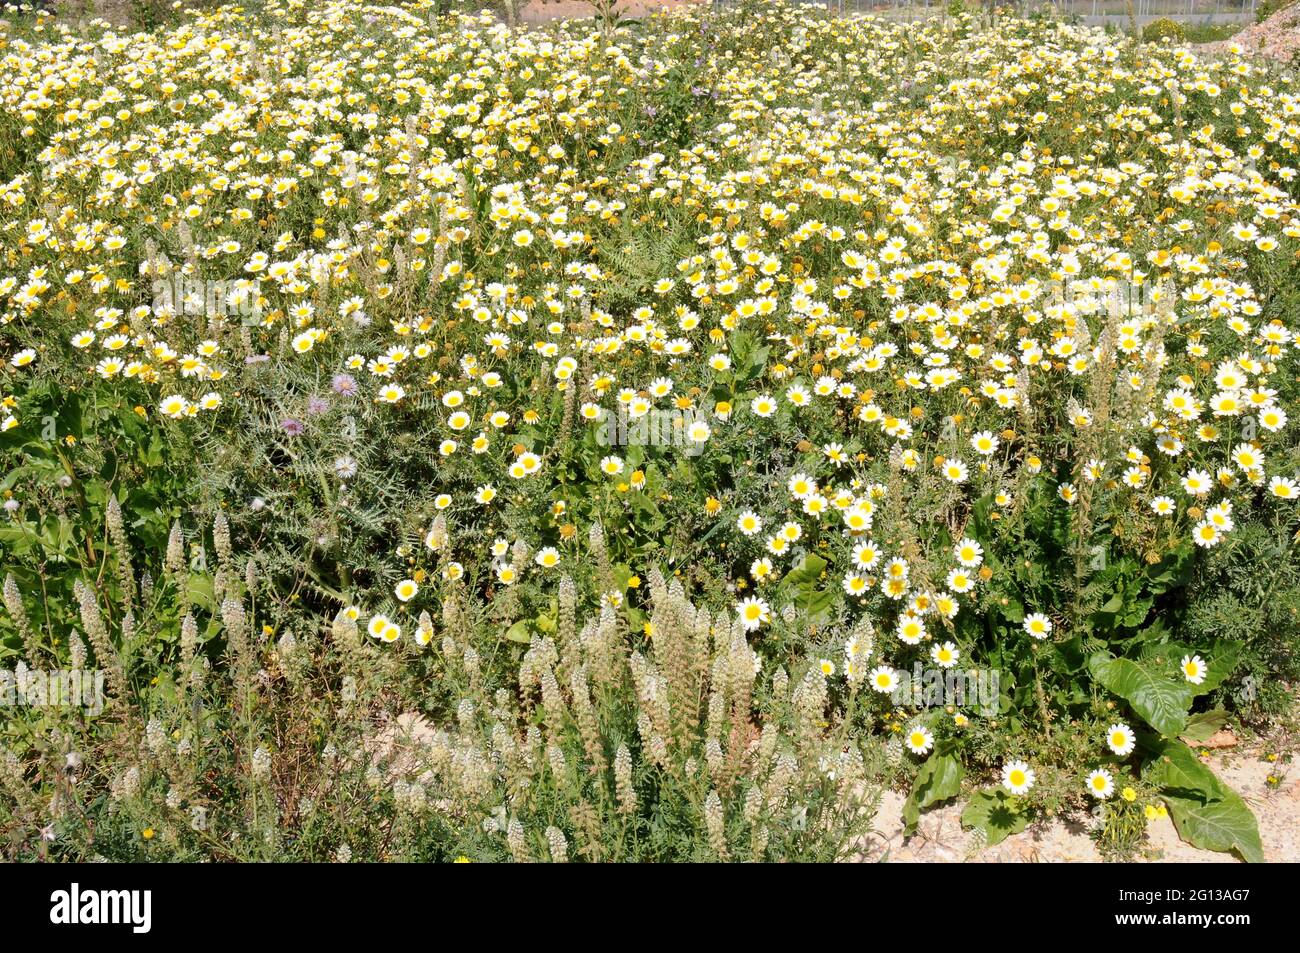 Corn camomile or field camomile (Anthemis arvensis) is an annual plant native to Europe. This photo was taken in Mallorca, Balearic Islands, Spain. Stock Photo